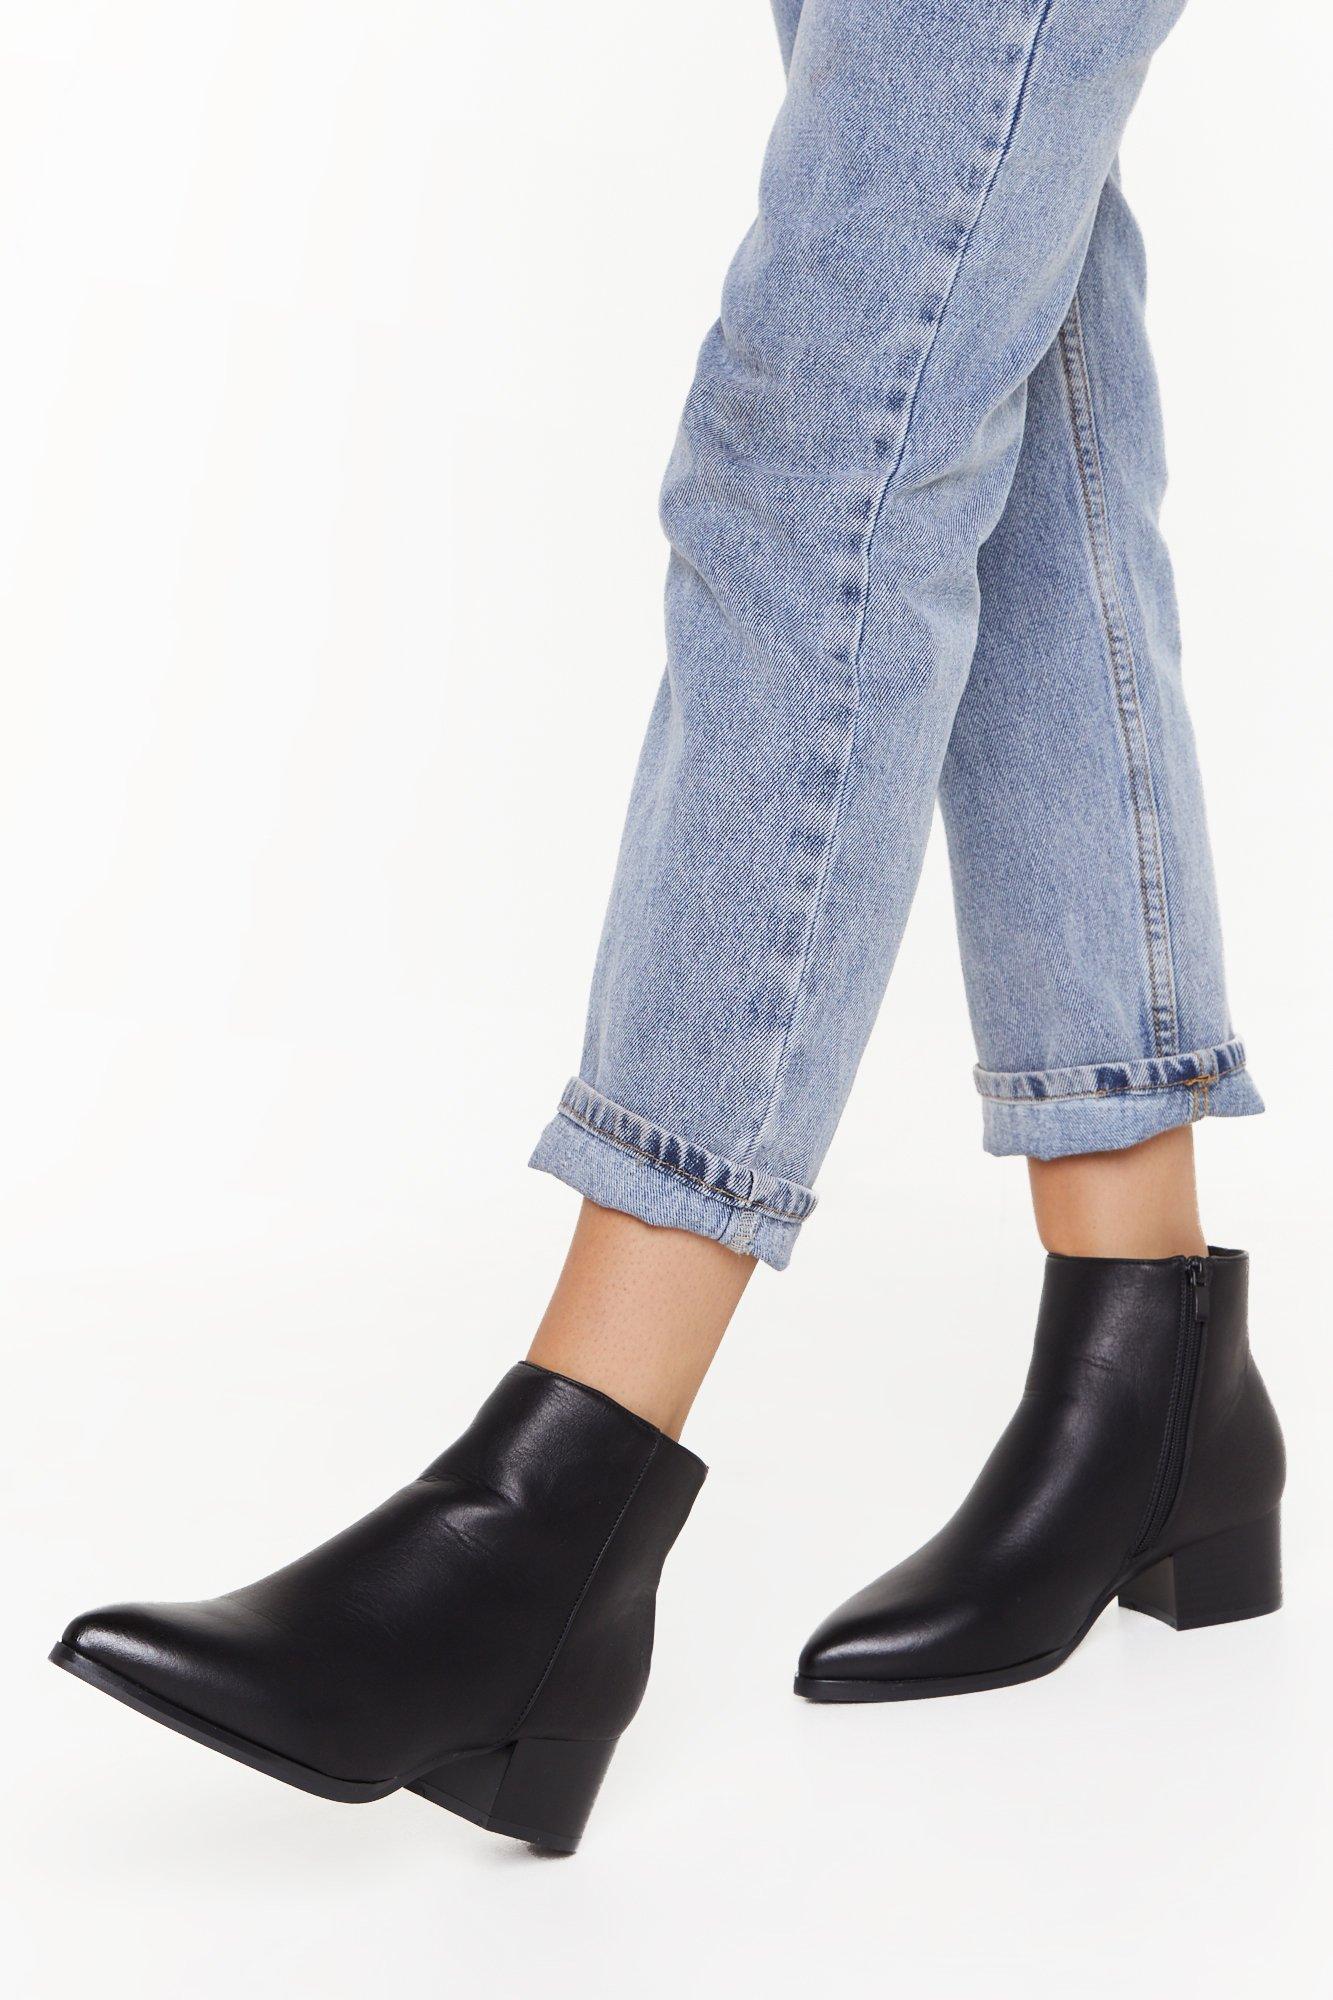 black pointed heeled boots